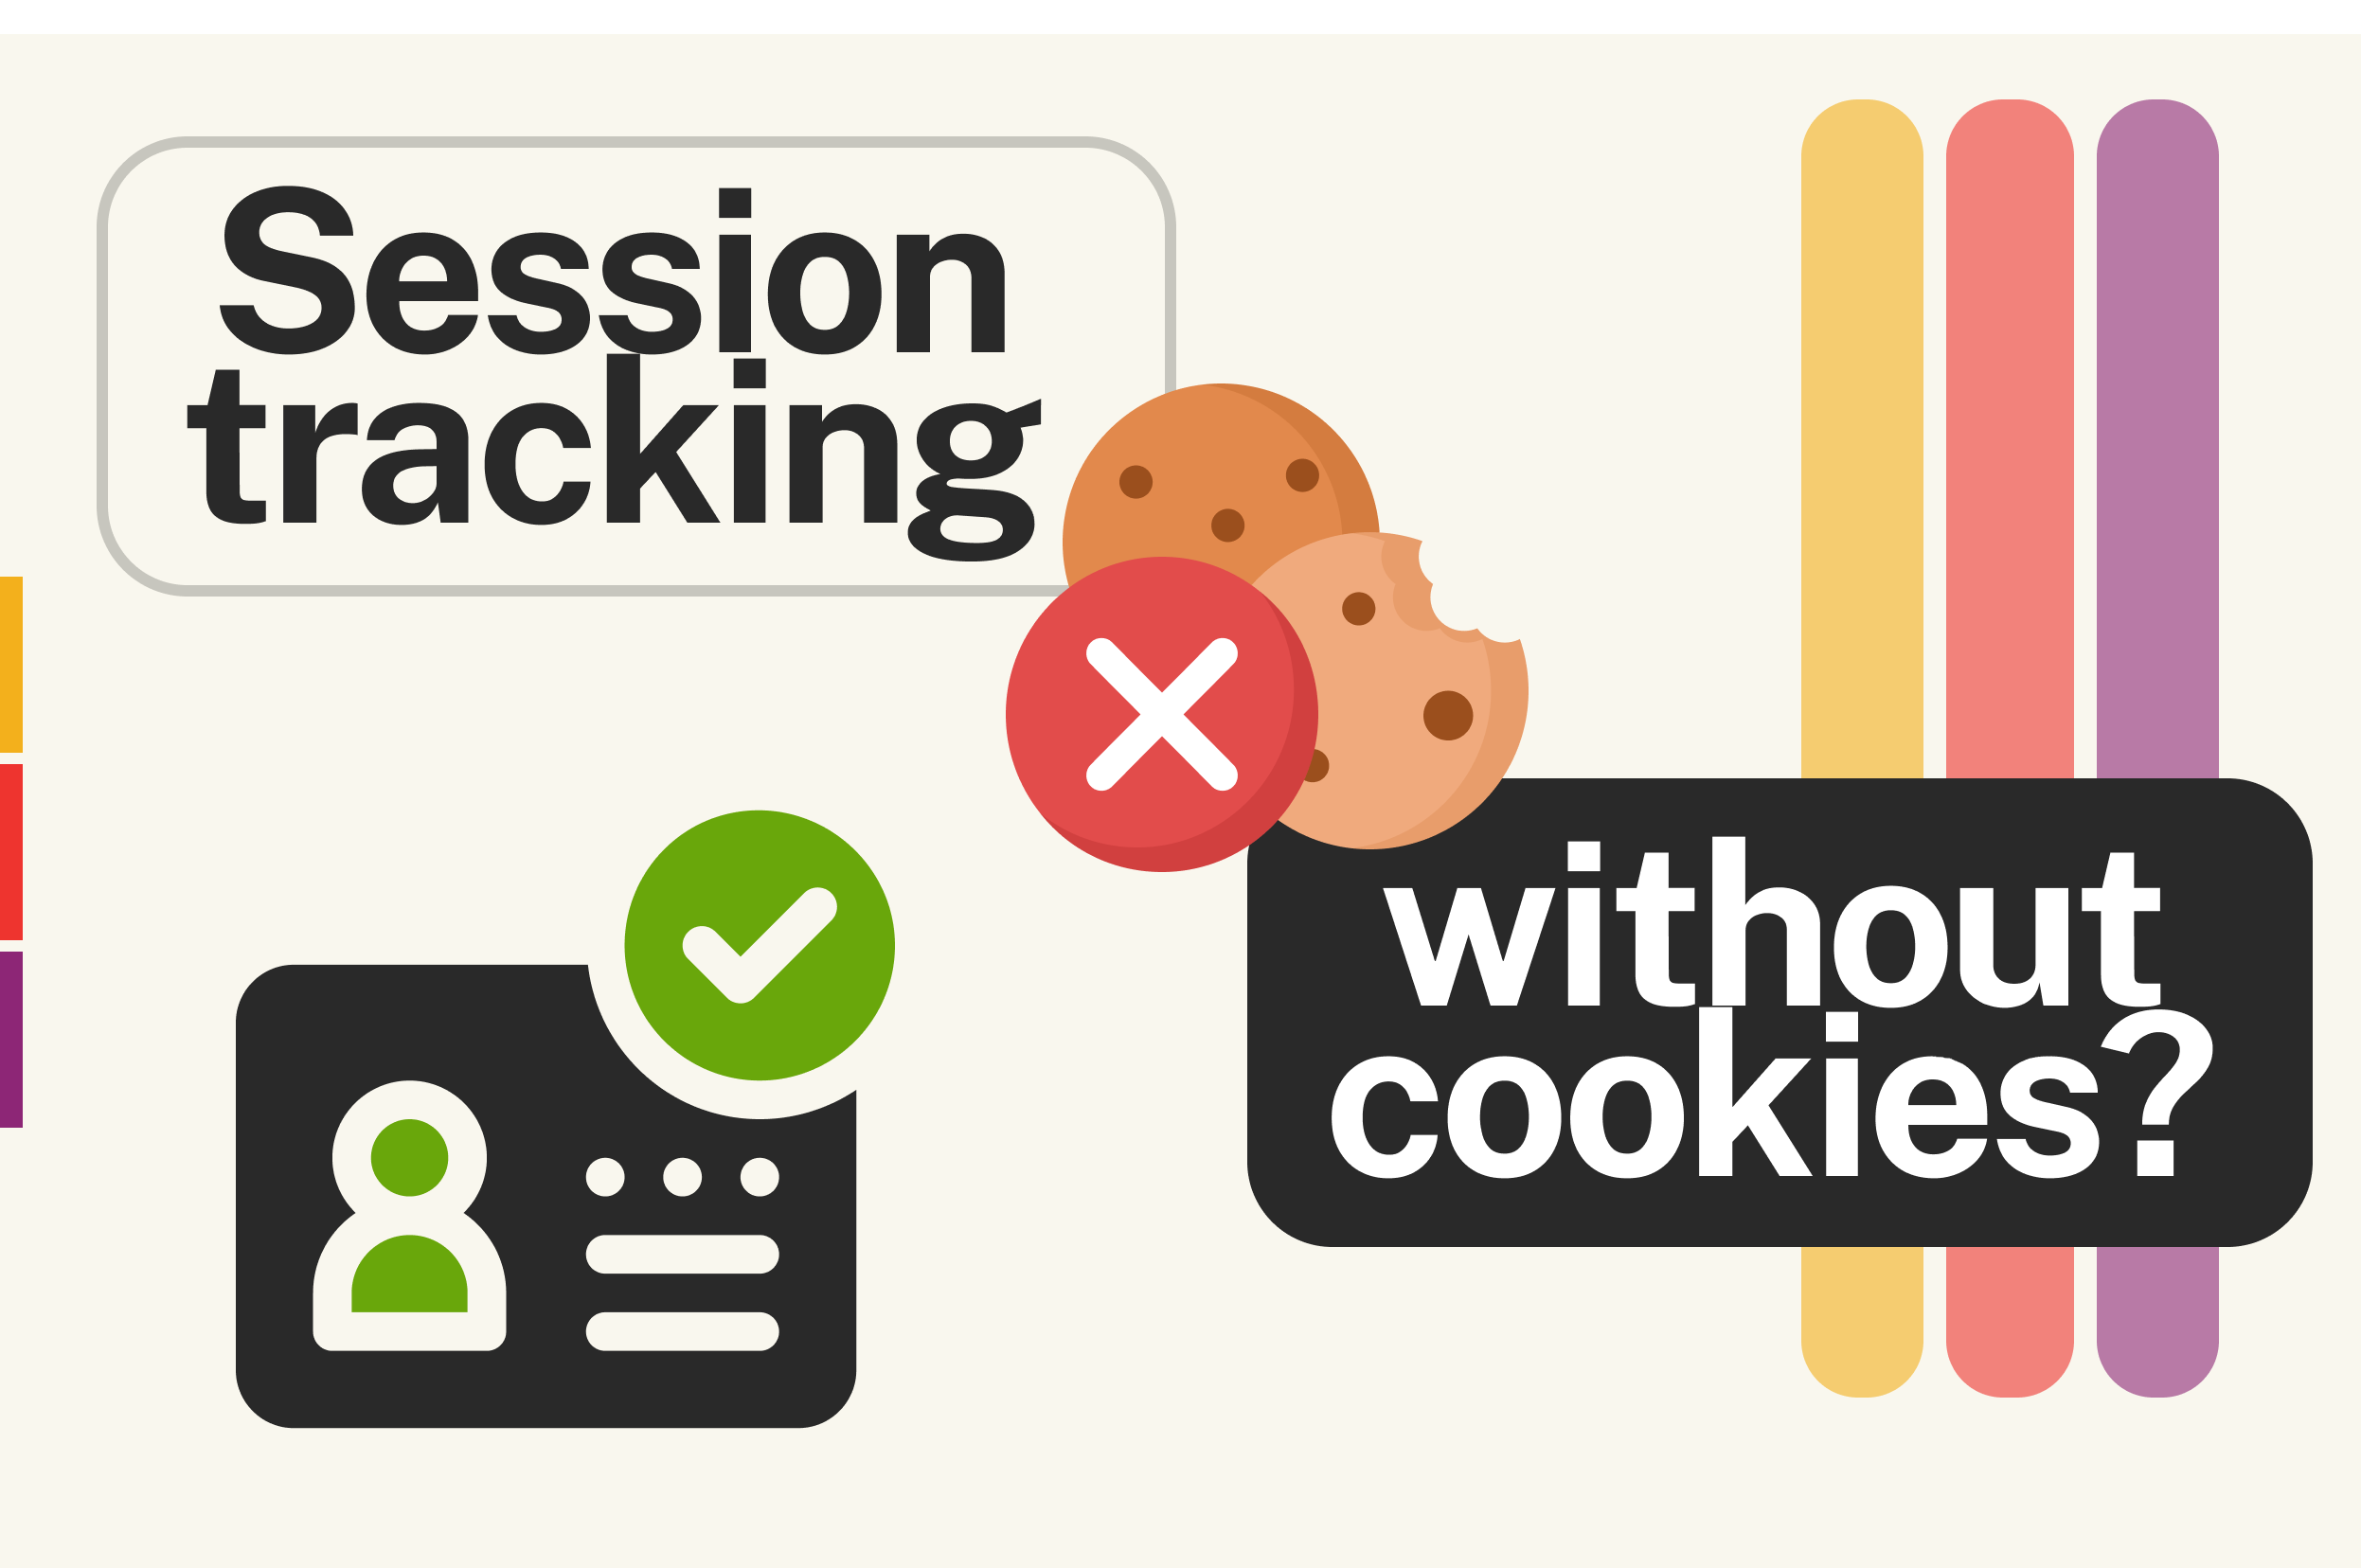 Session tracking without cookies?